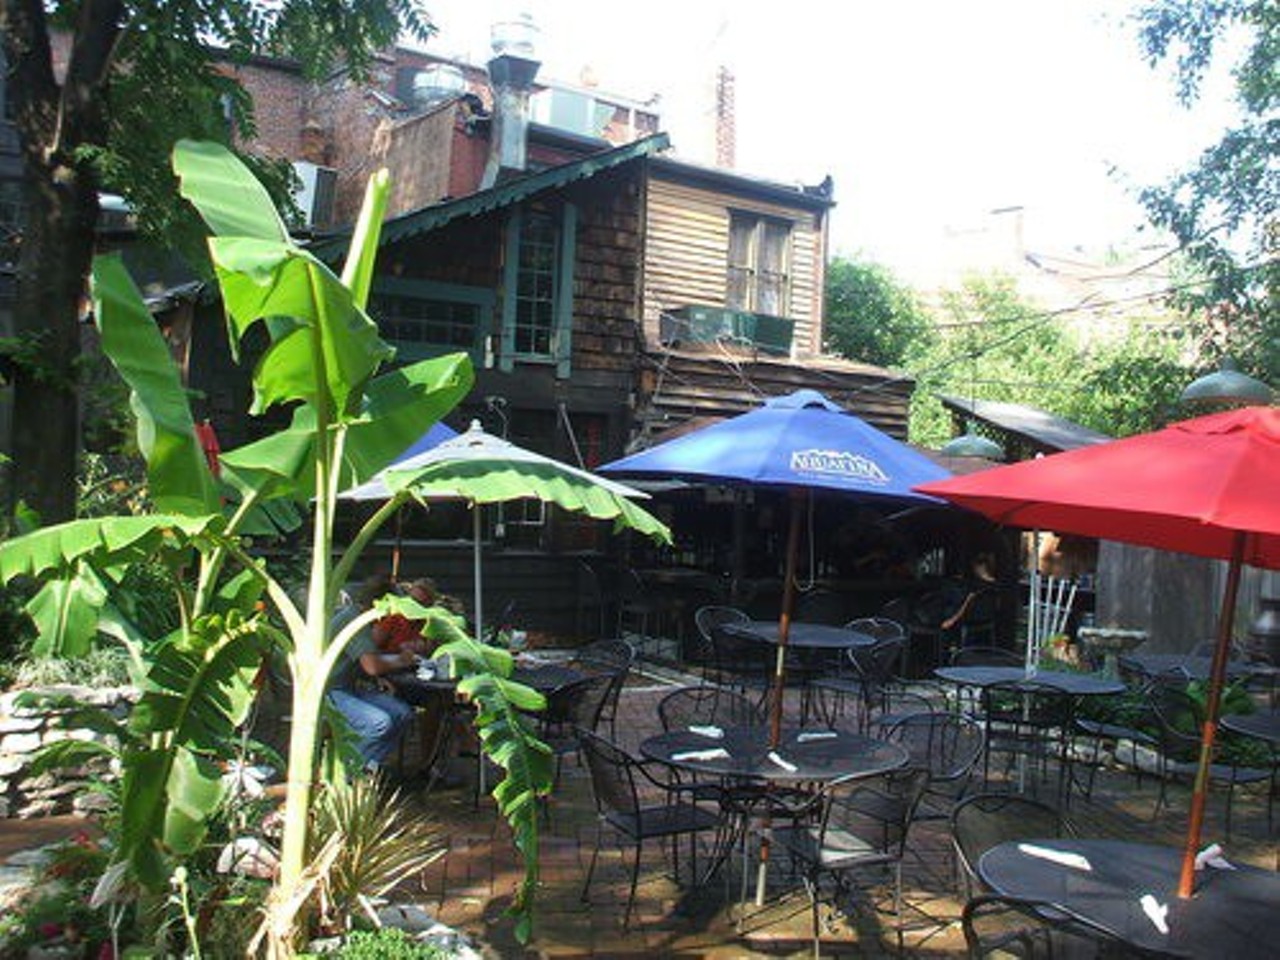 Mollys in Soulard
816 Geyer Ave.
St. Louis, MO 63104
(314) 241-6200
This Soulard hotspot doesn't just have New Orleans-inspired favorites -- it also has an awesome patio. Combine that with the fact that your dog can join you, and you have one great place for you both to kick back and relax. Photo by Kristen Klempert.